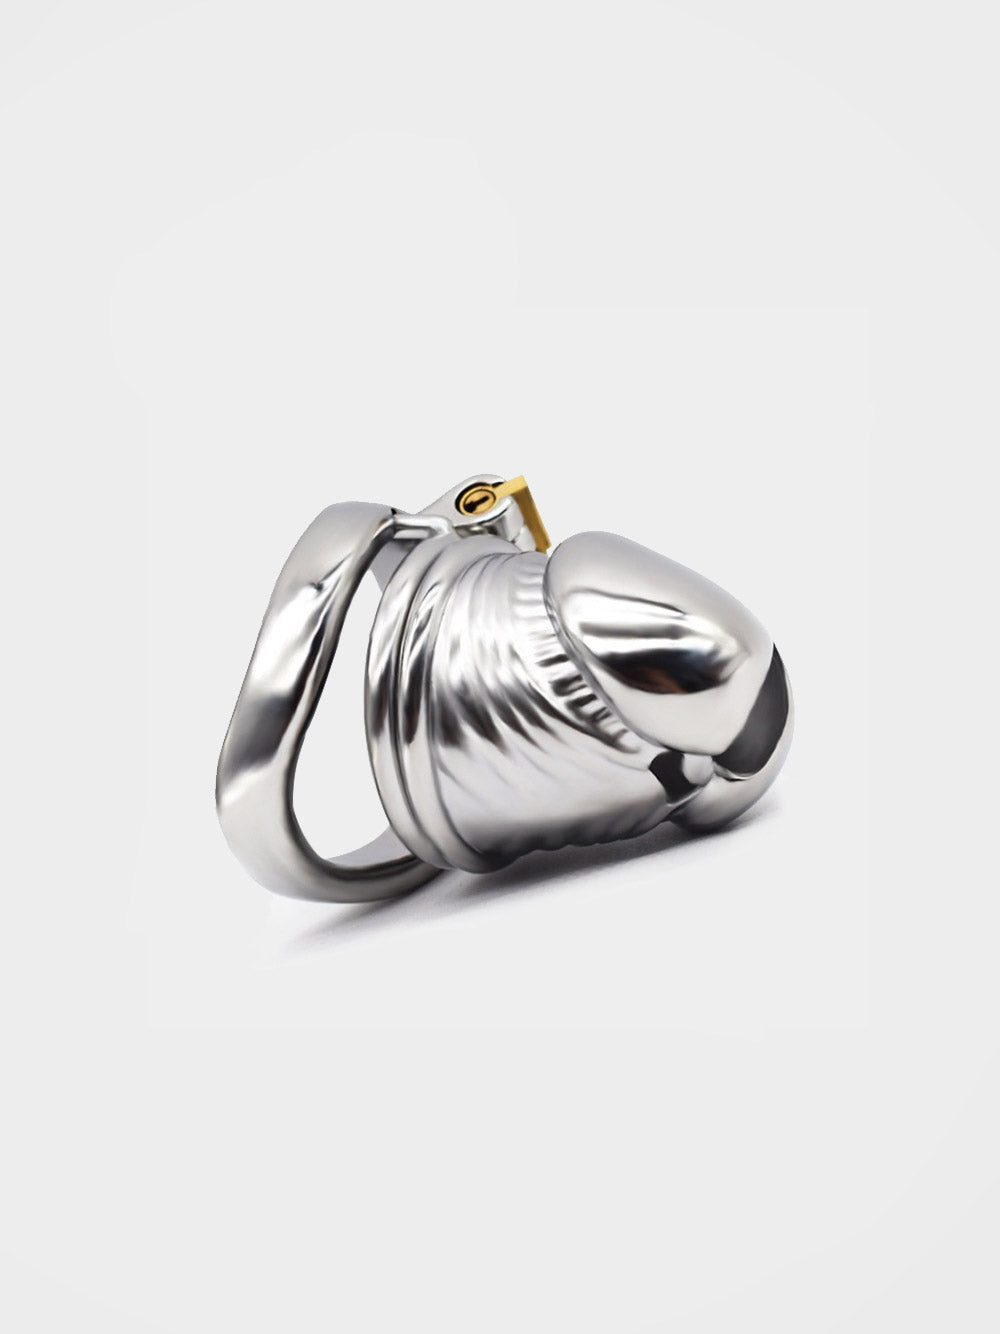 This chastity cage is shaped like a realistic penis